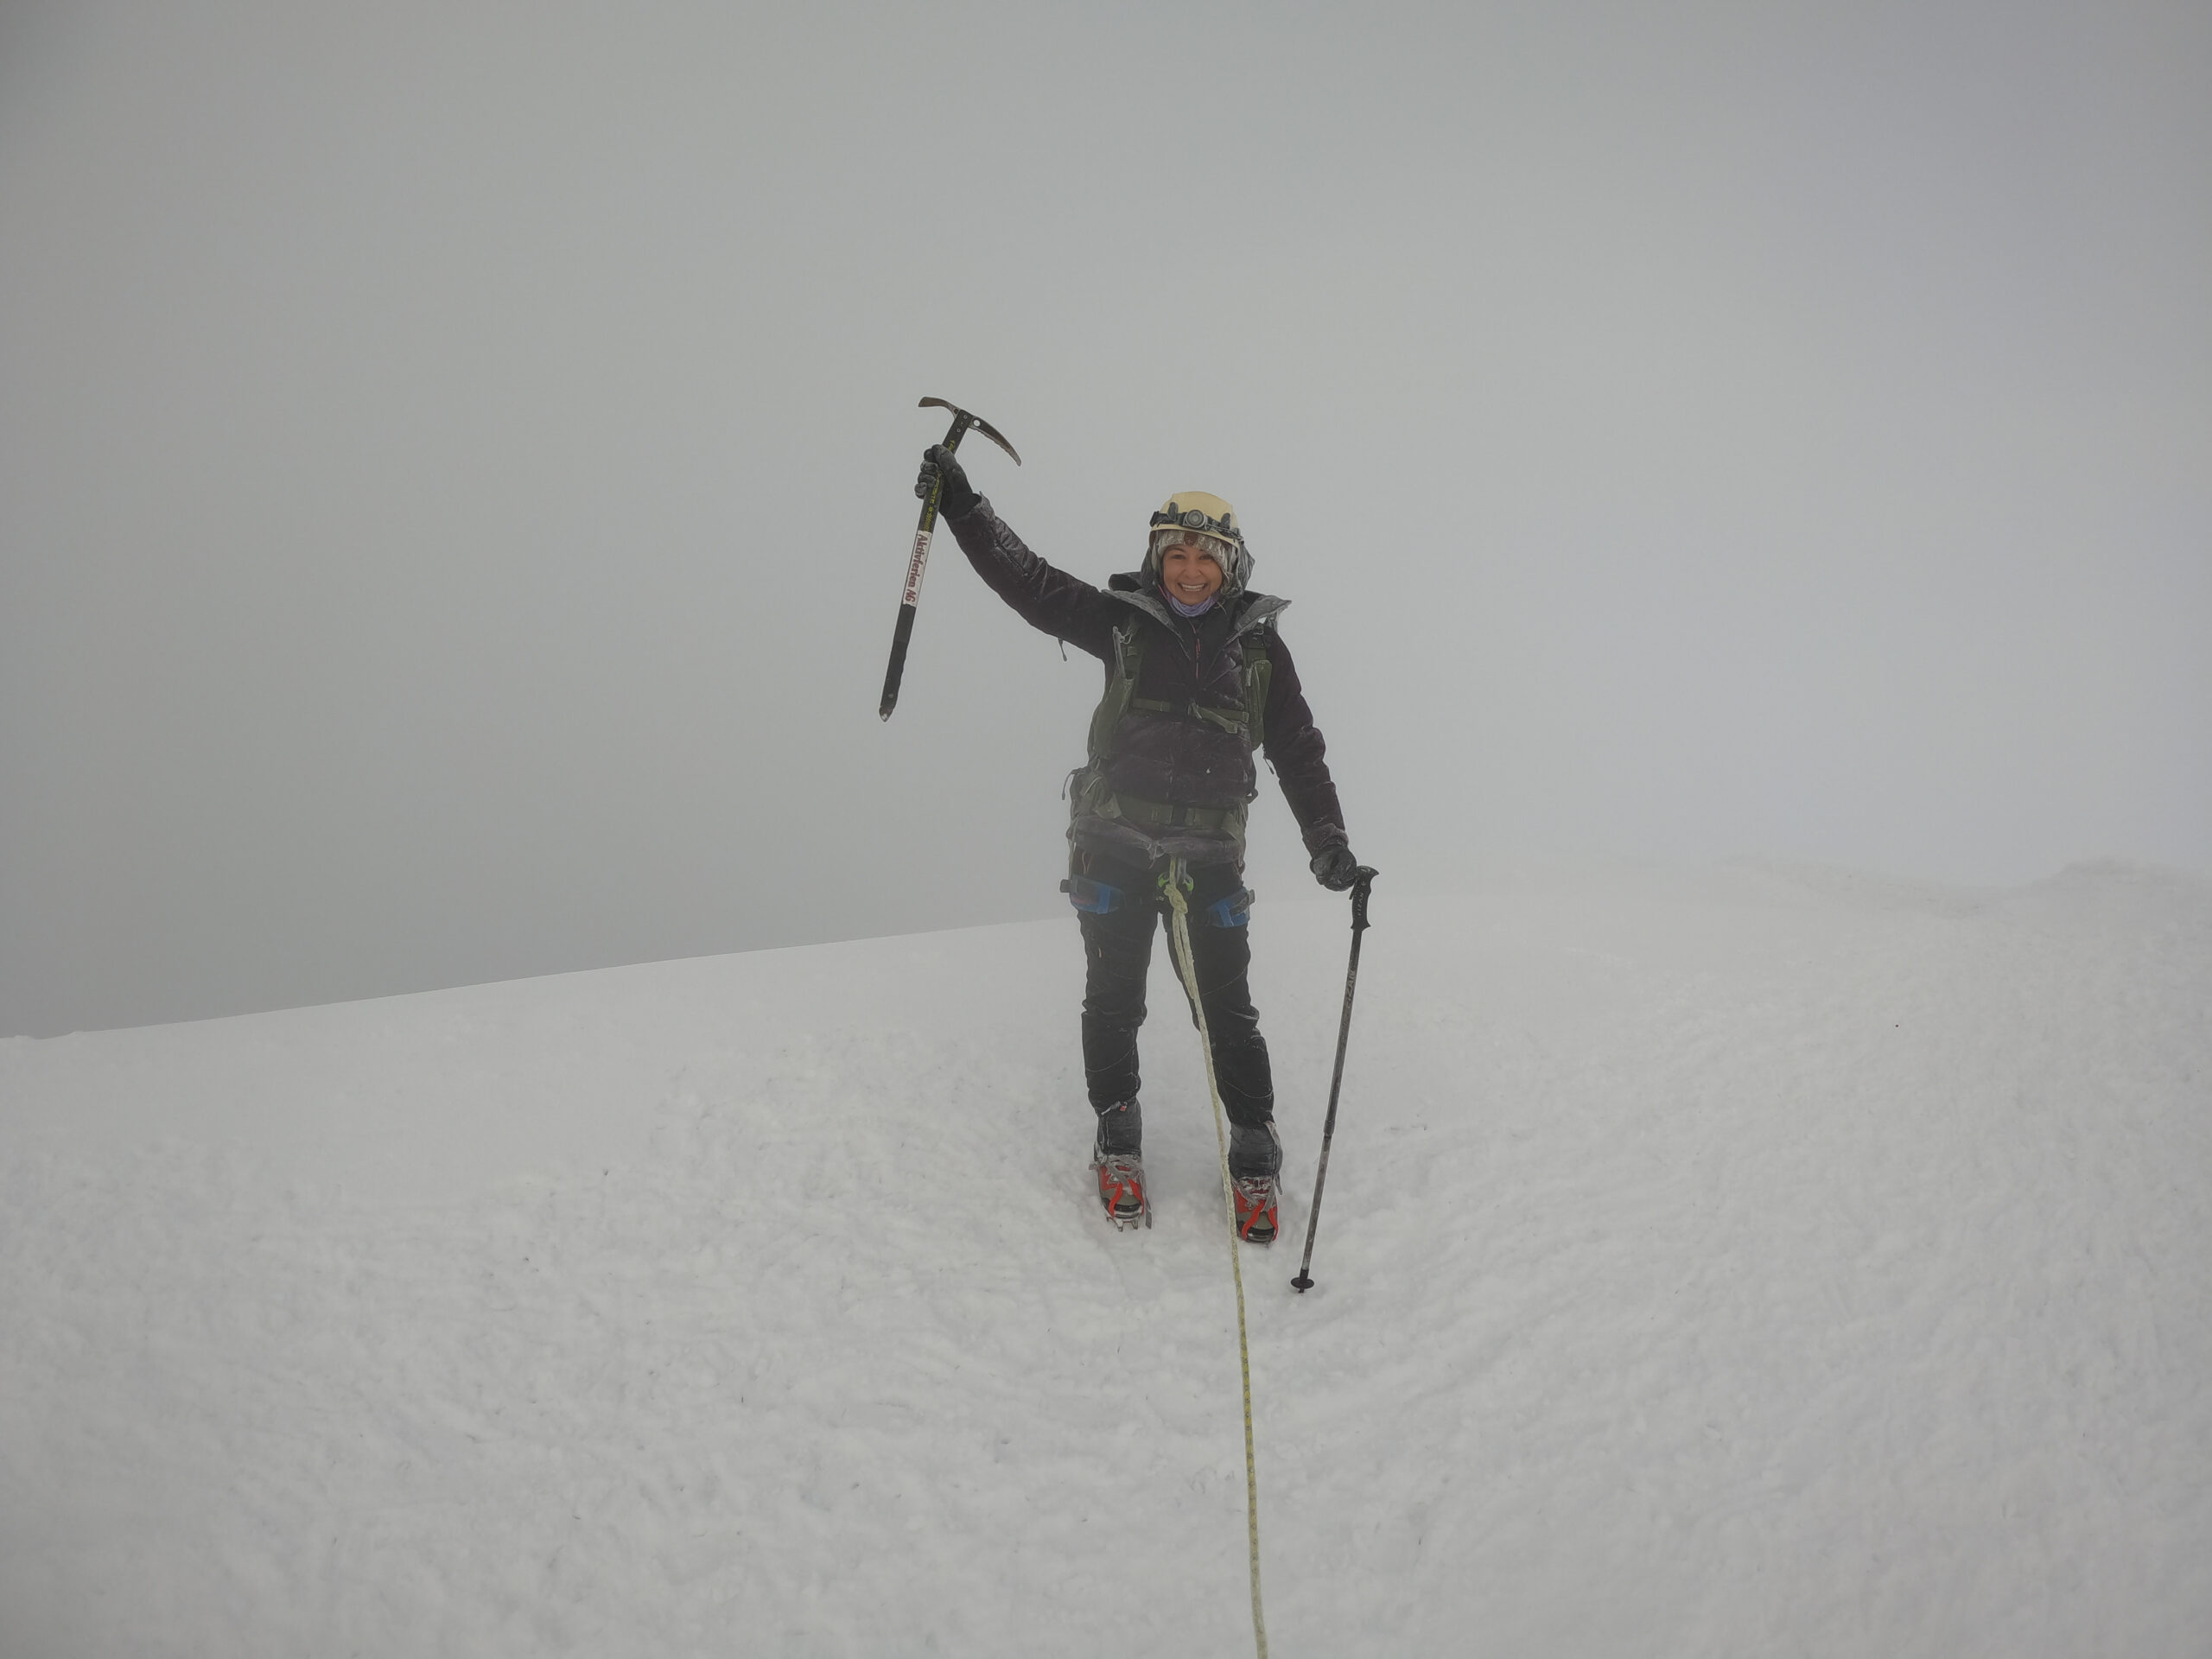 Woman with ice axe at the summit of Cotopaxi Volcano In Ecuador 